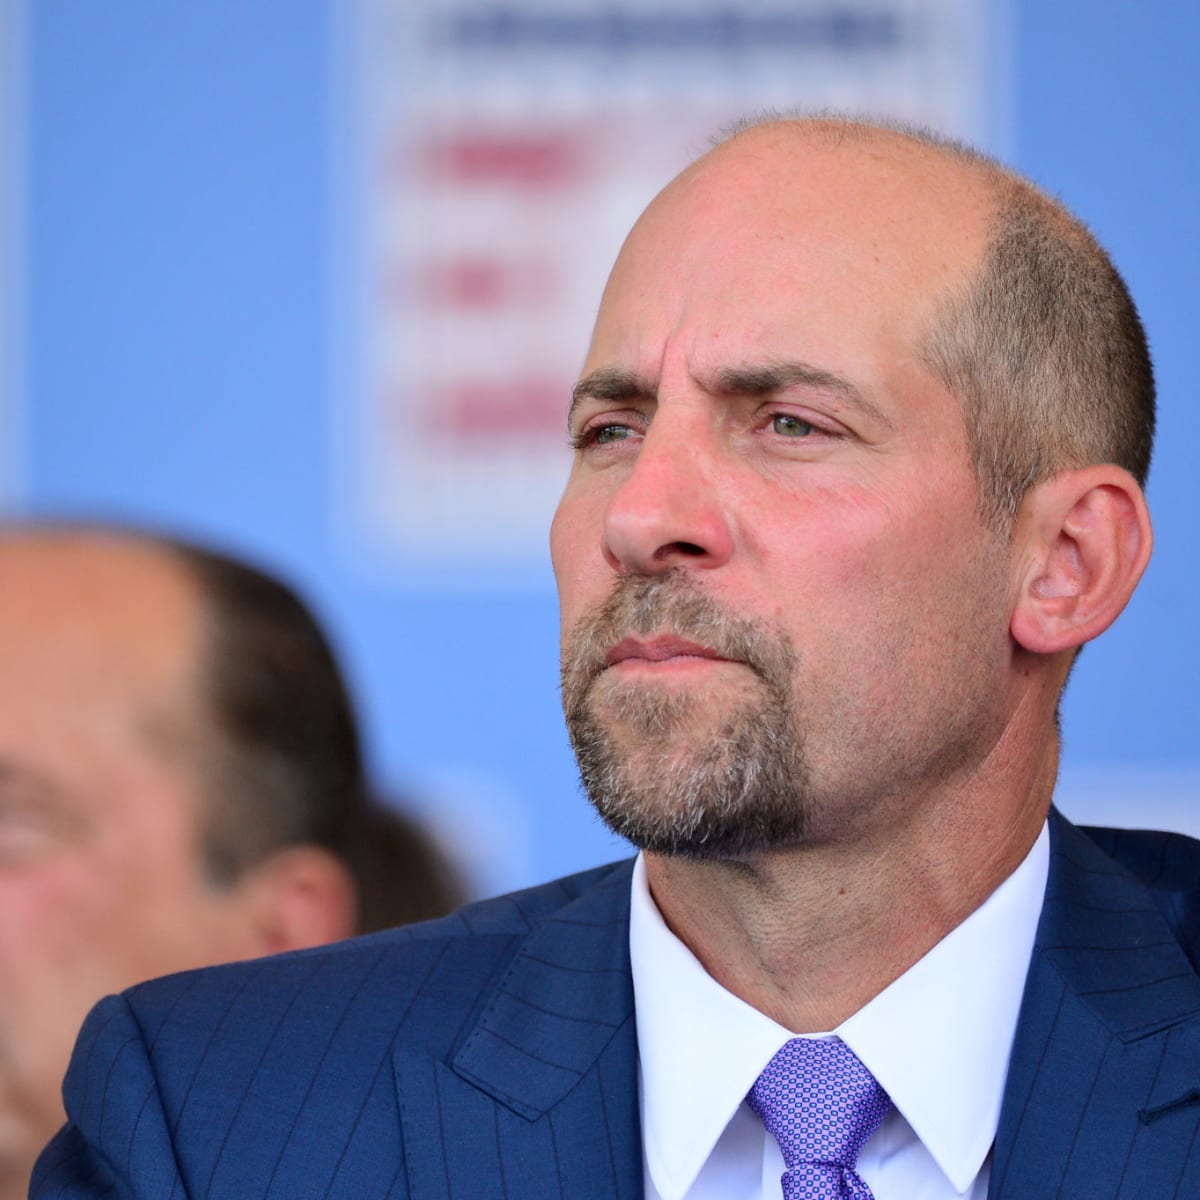 John Smoltz's Net Worth: Smoltzie Cashed In On His Arm - FanBuzz